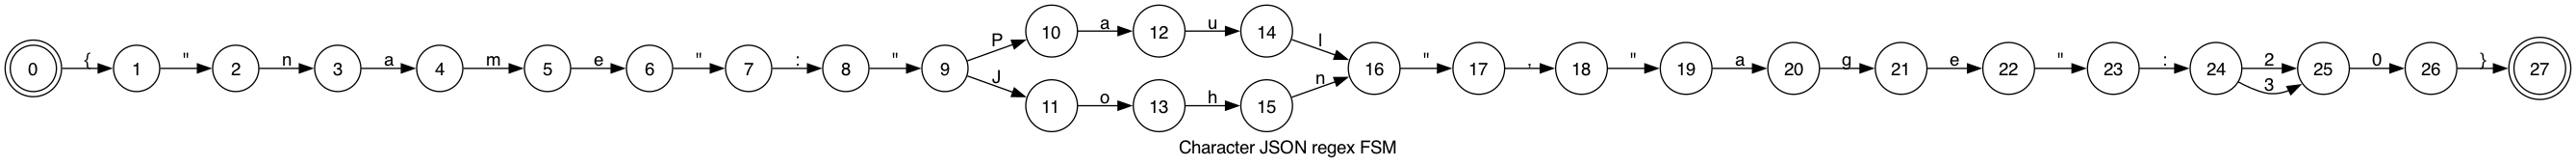 fsm_json_characters.png